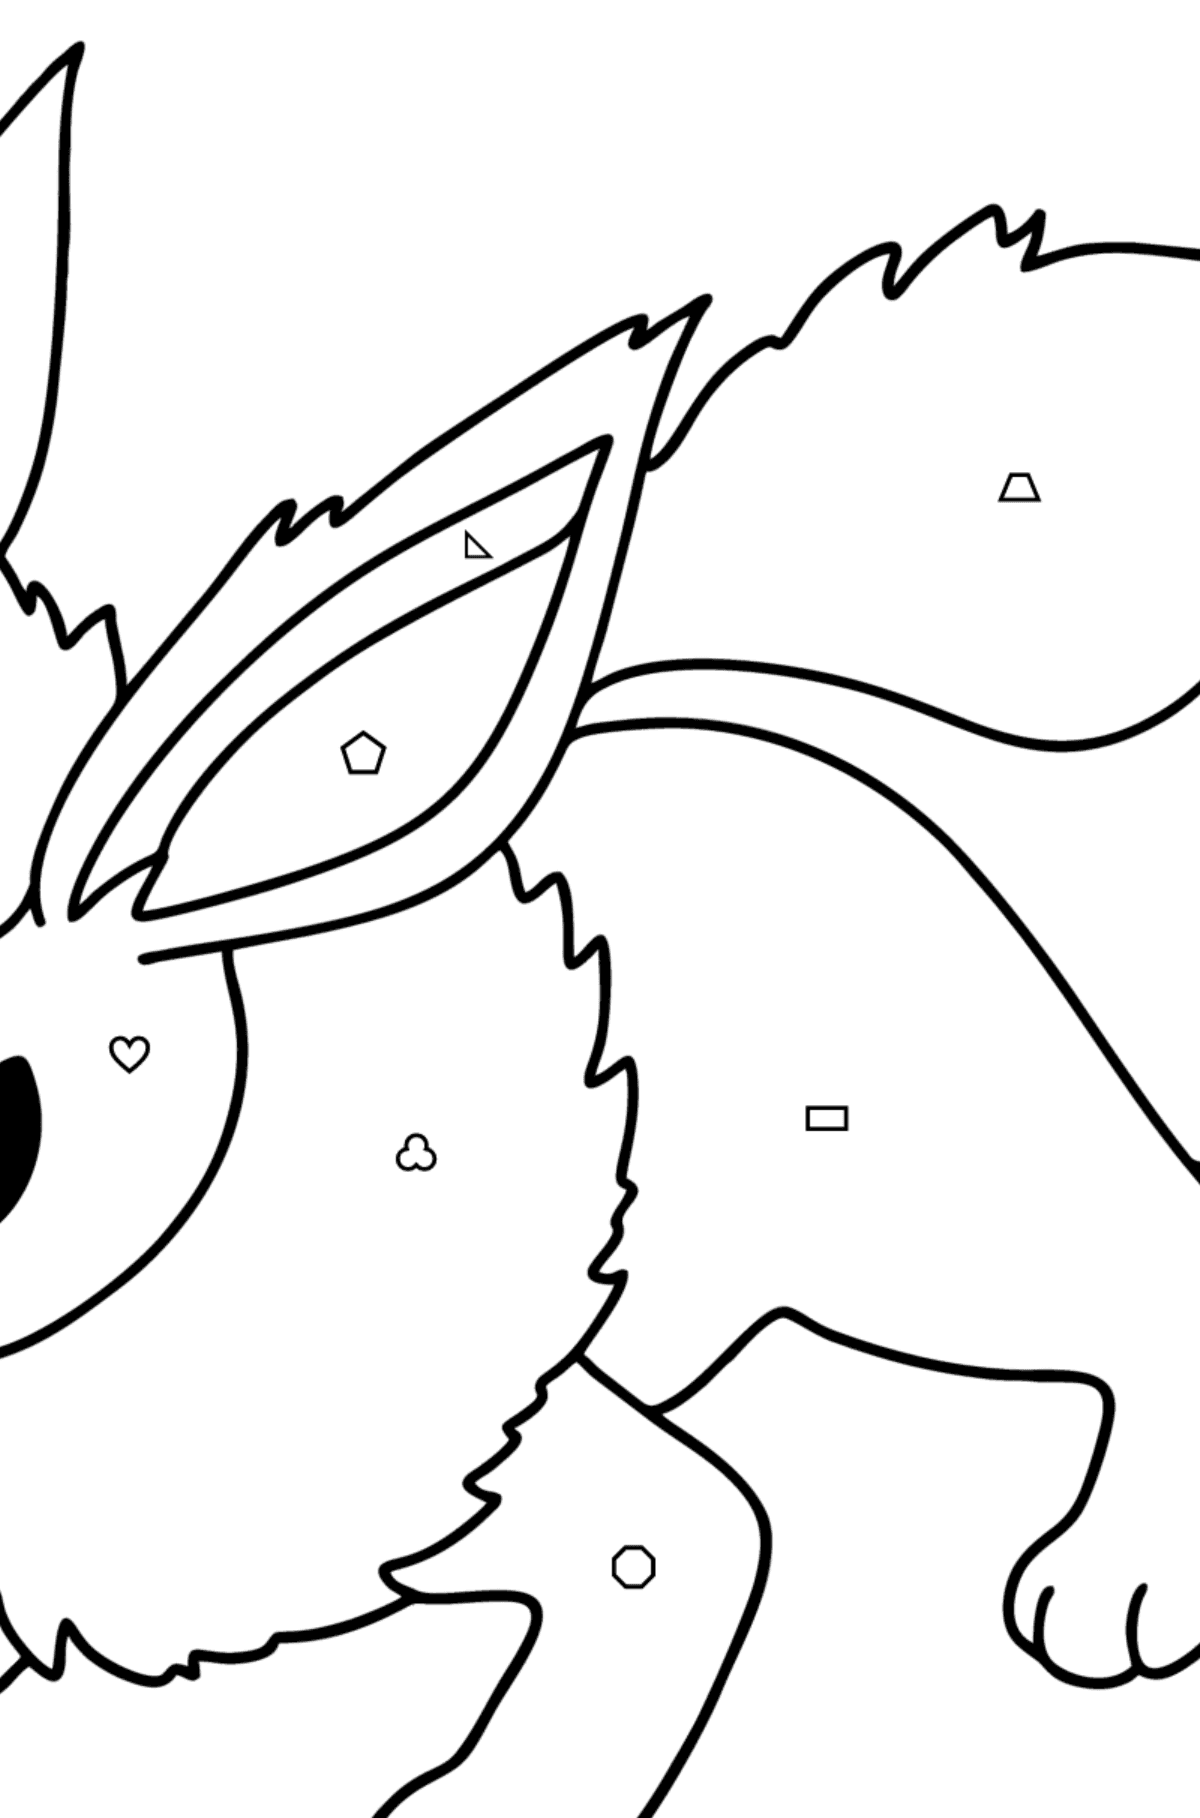 Pokemon Go Flareon coloring page - Coloring by Geometric Shapes for Kids